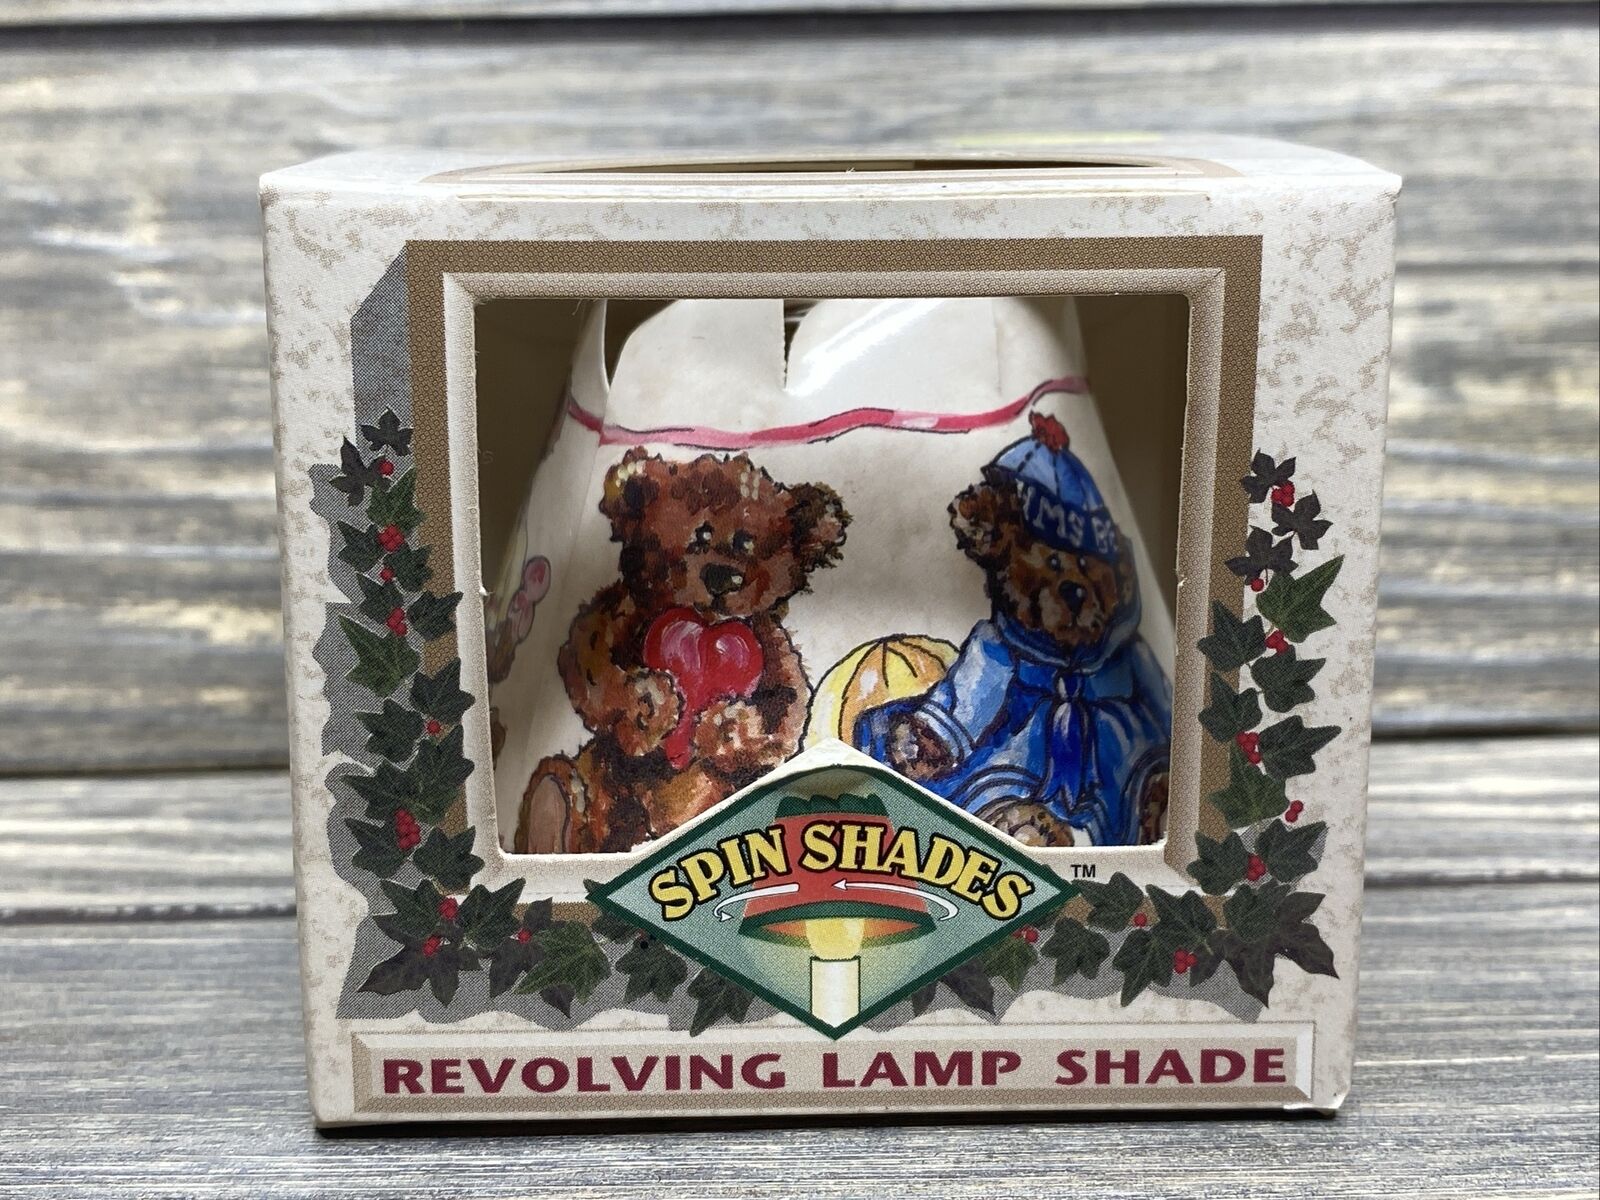 Vintage Spin Shades 1997 Replacement Revolving Lamp Shade Teddy Bears Collection